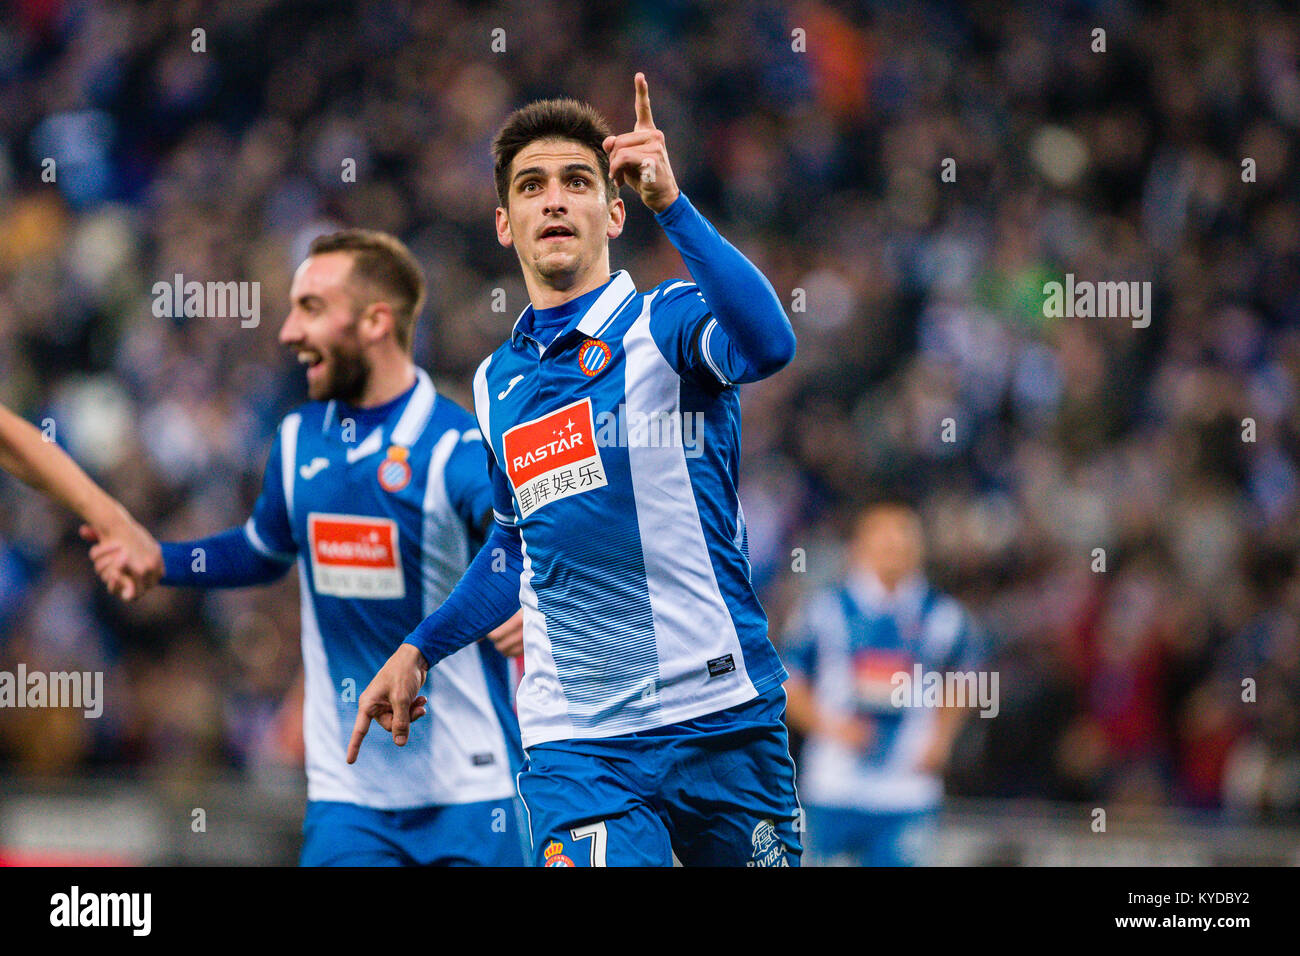 RCD Espanyol forward Gerard Moreno (7) celebrates scoring the goal during  the match between RCD Espanyol v Athletic Club, for the round 19 of the  Liga Santander, played at RCDE Stadium on